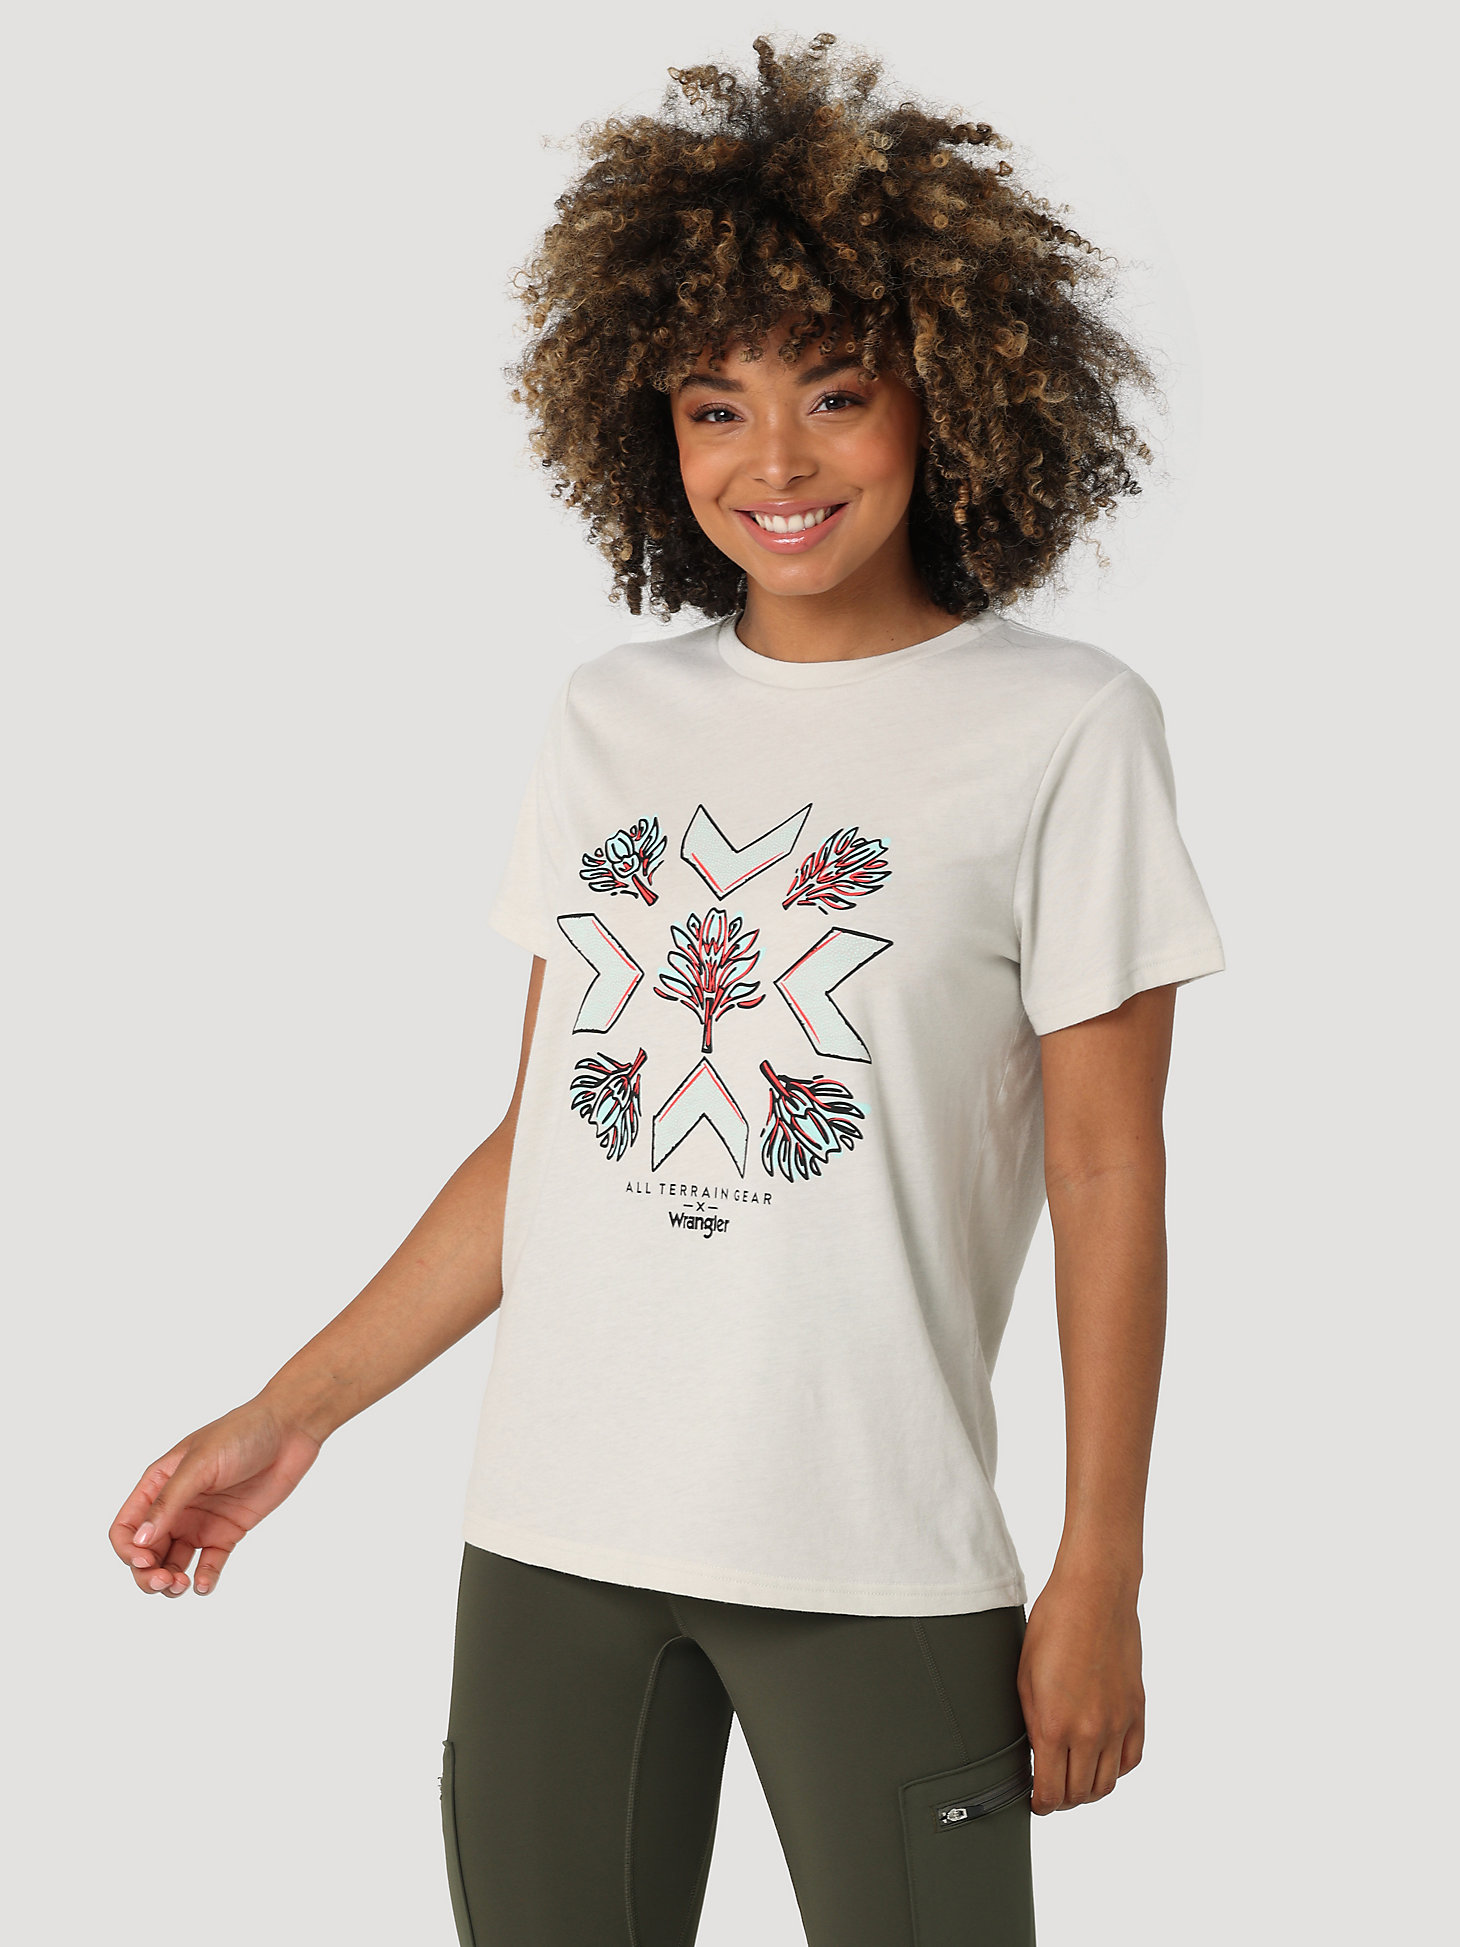 ATG By Wrangler™ Women's Graphic Tee in Lunar Rock main view